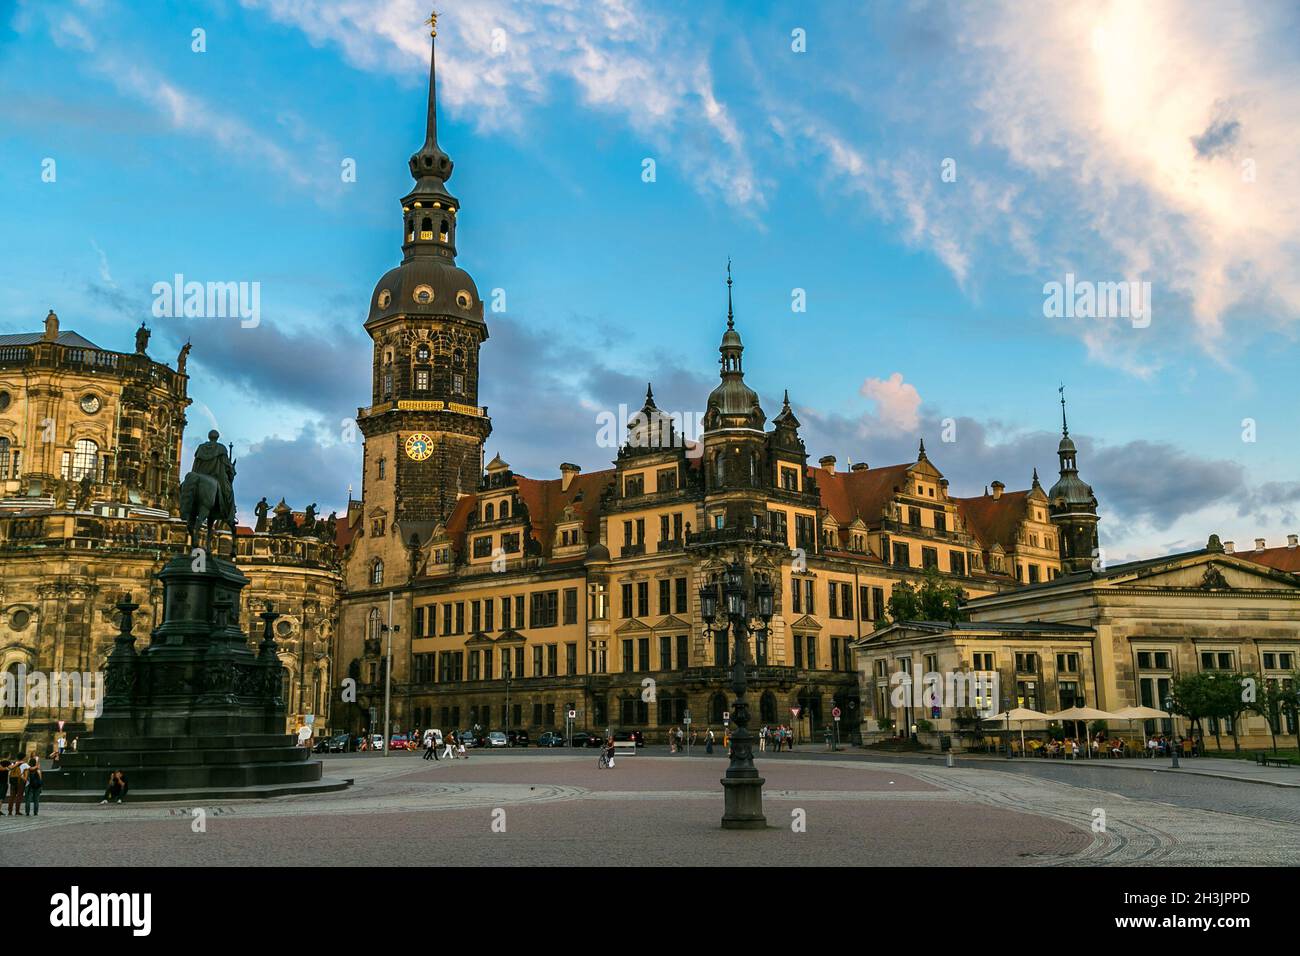 Sunset view of Dresden. Stock Photo